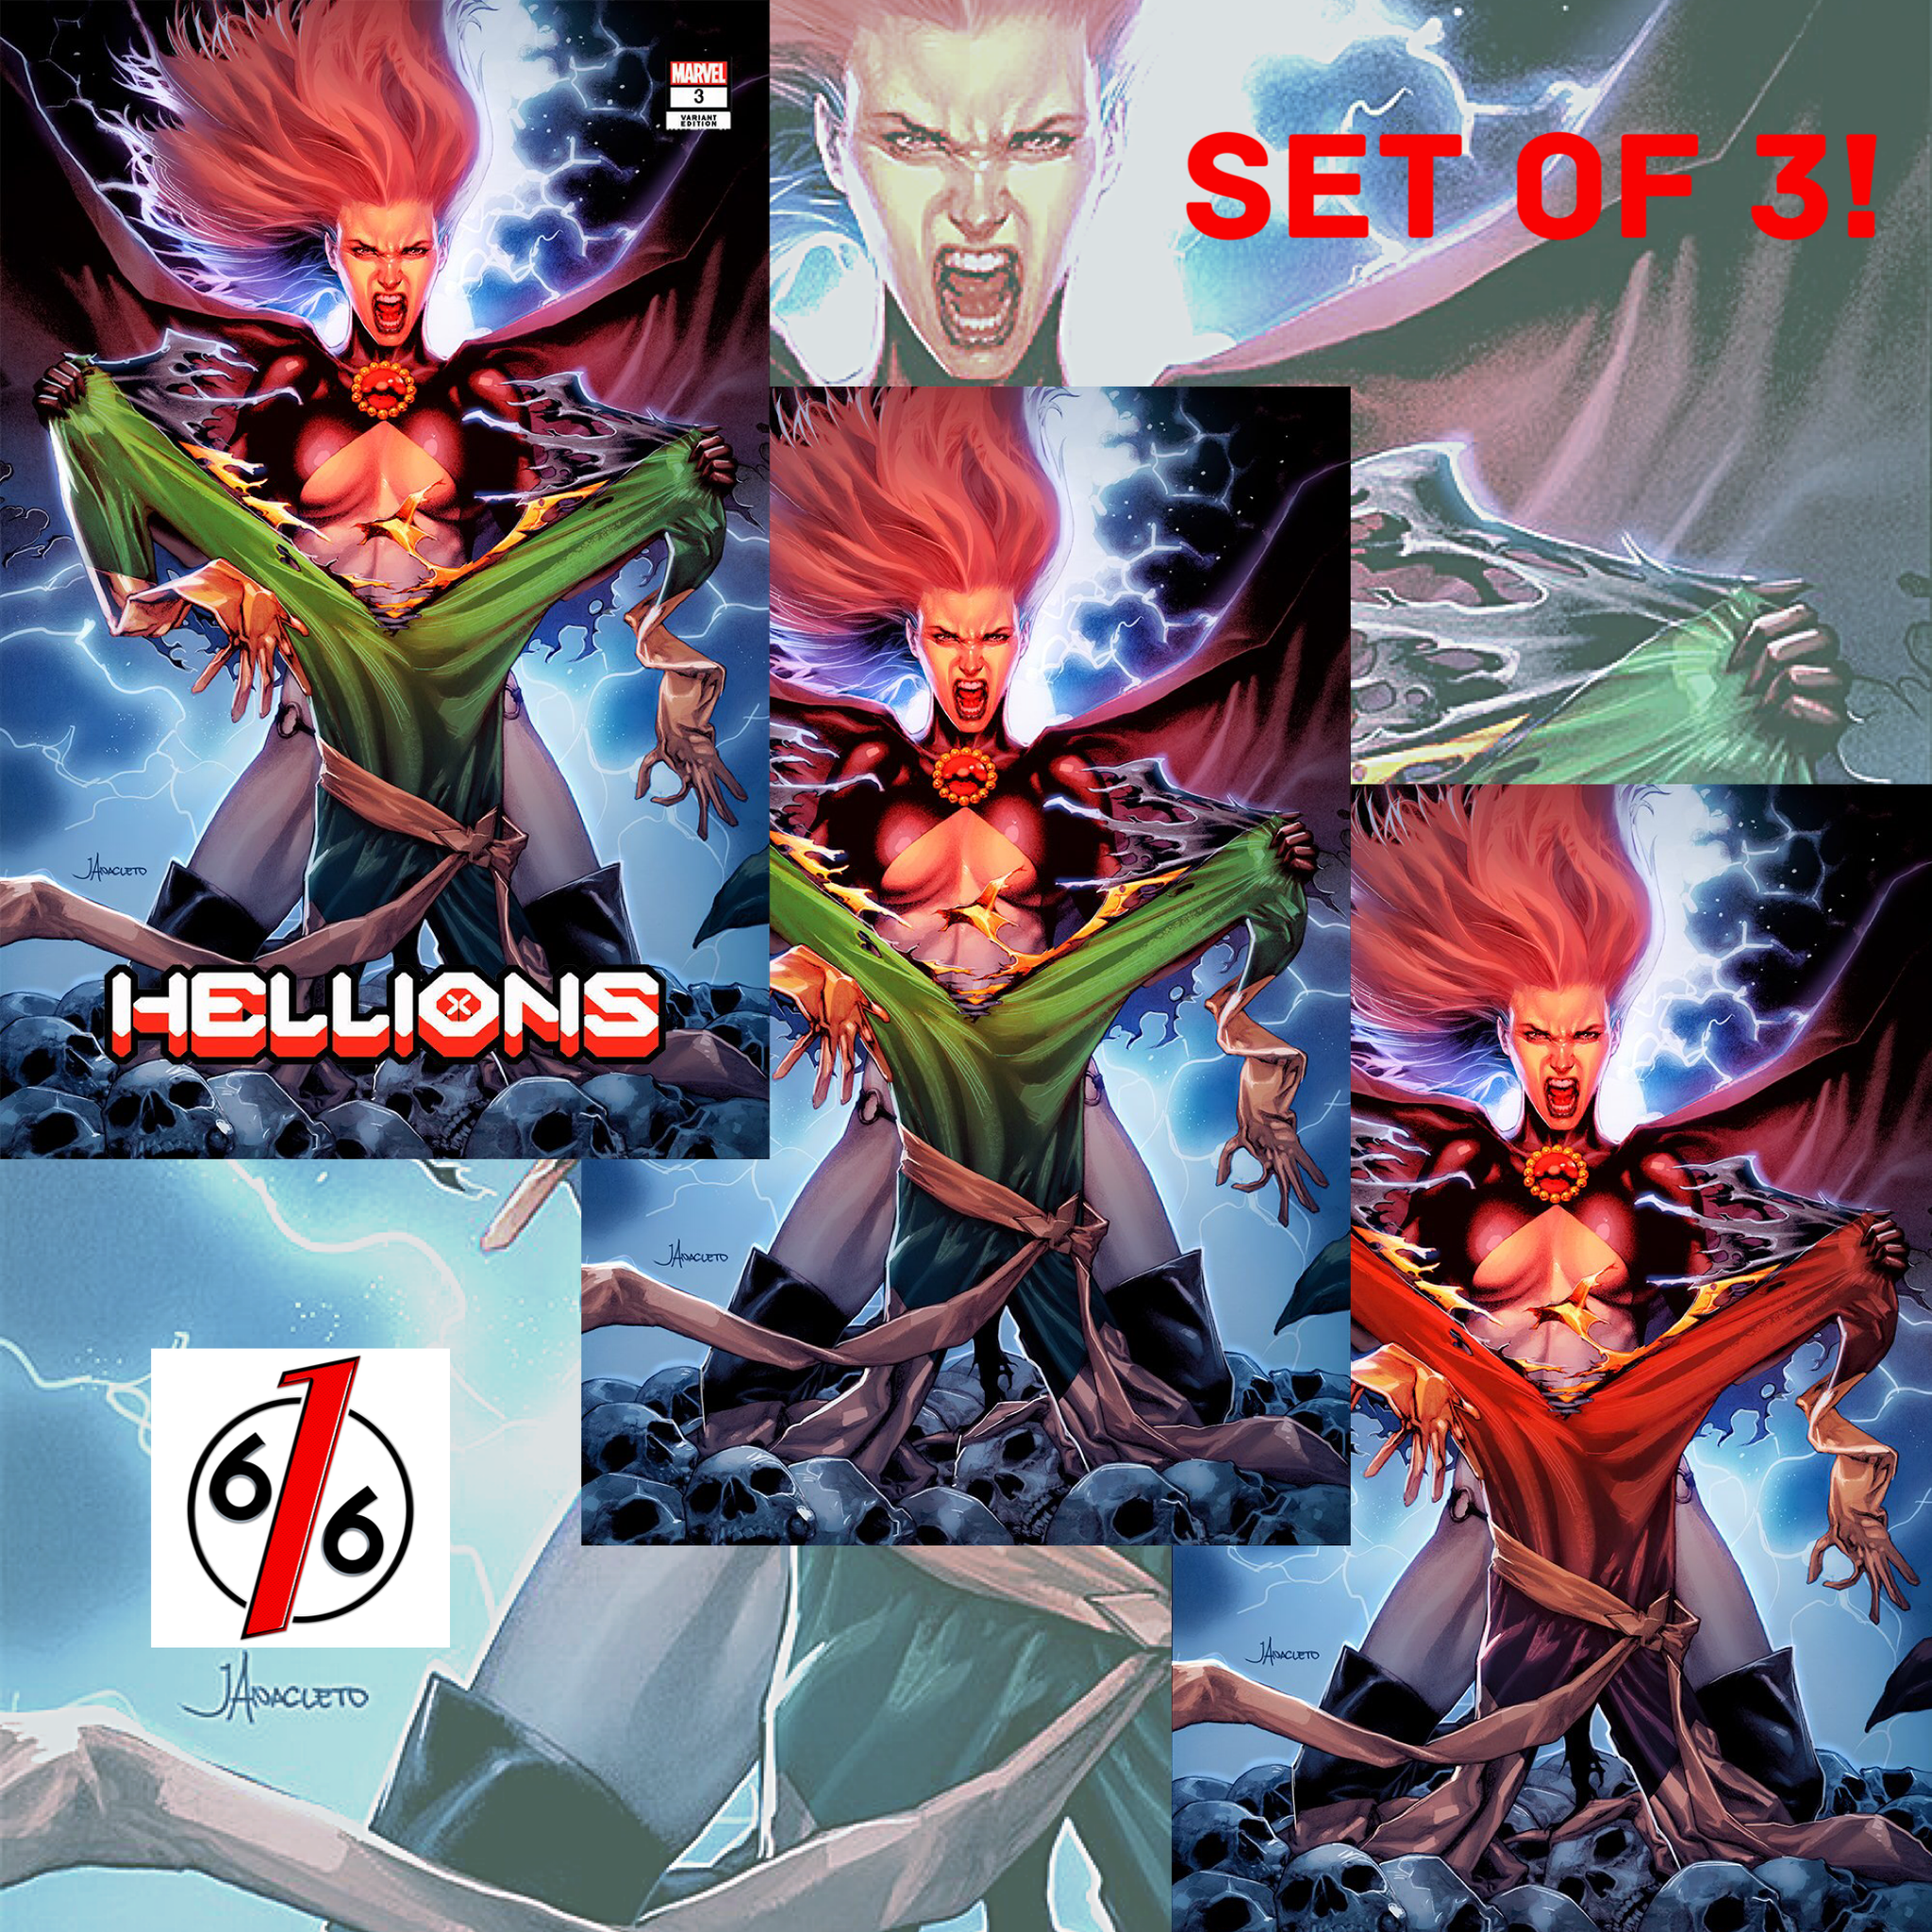 HELLIONS #3 JAY ANACLETO Exclusive Variant Set of 3 Goblin Queen